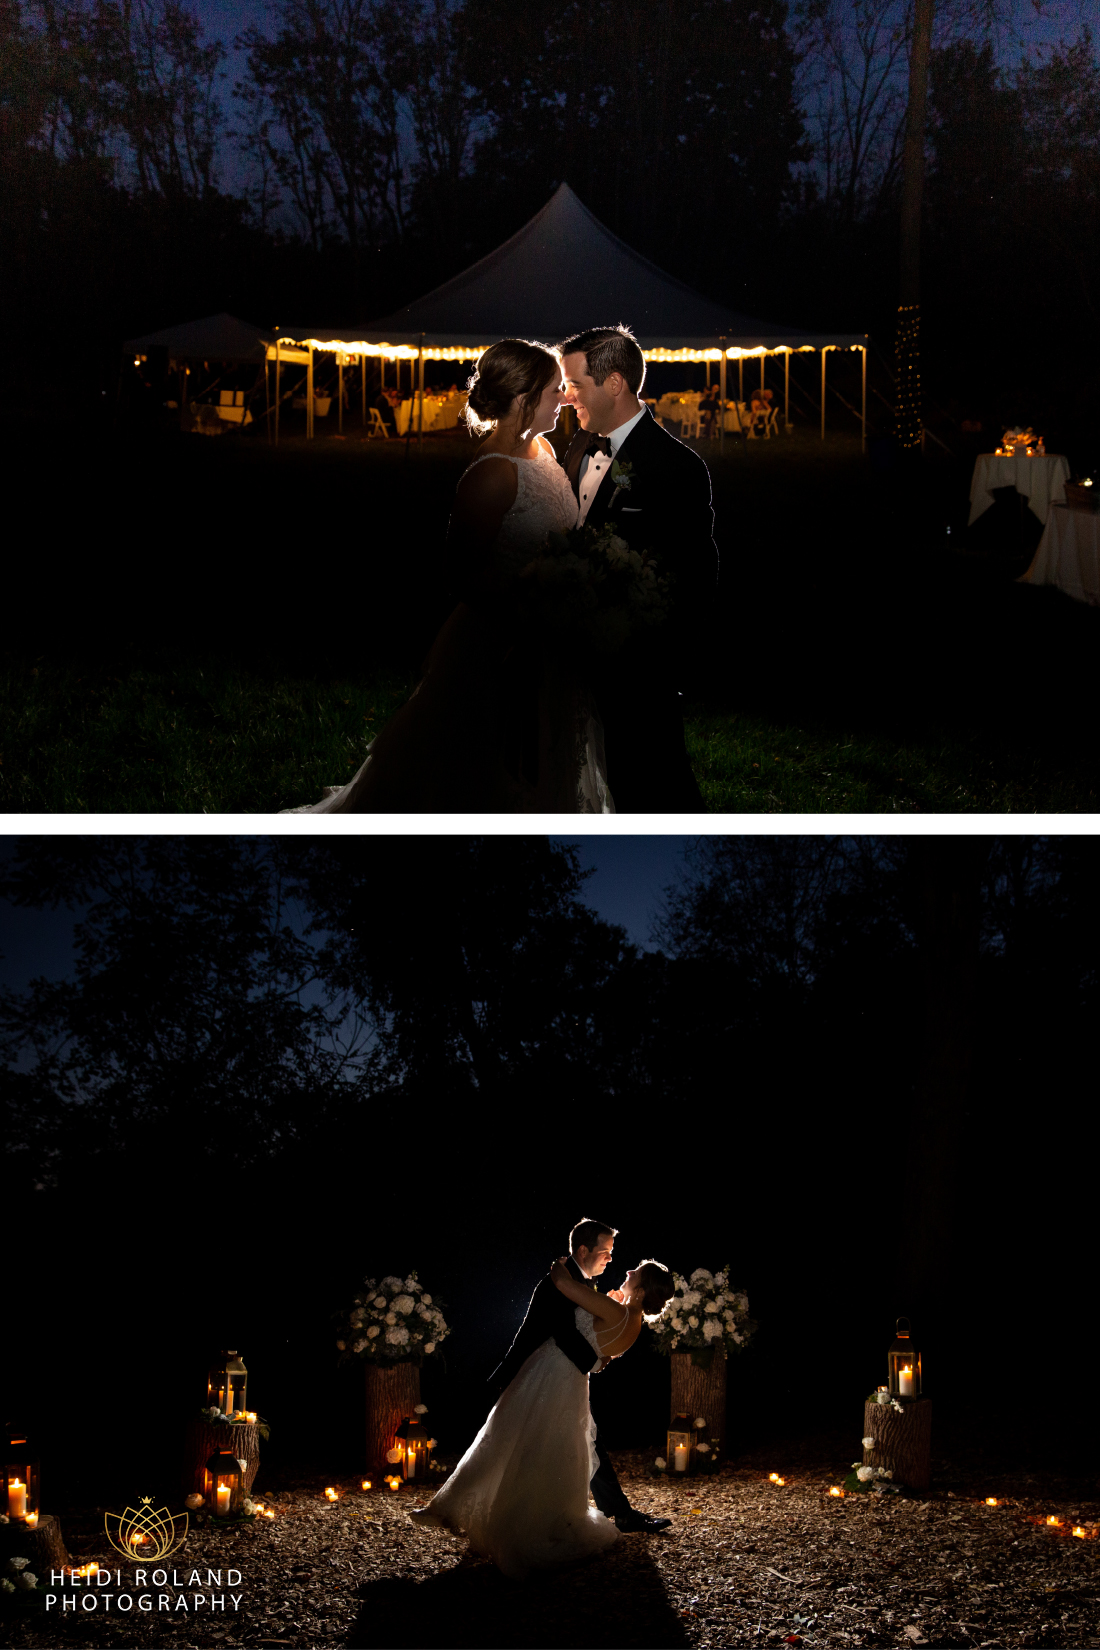 backlit night photo of bride and groom